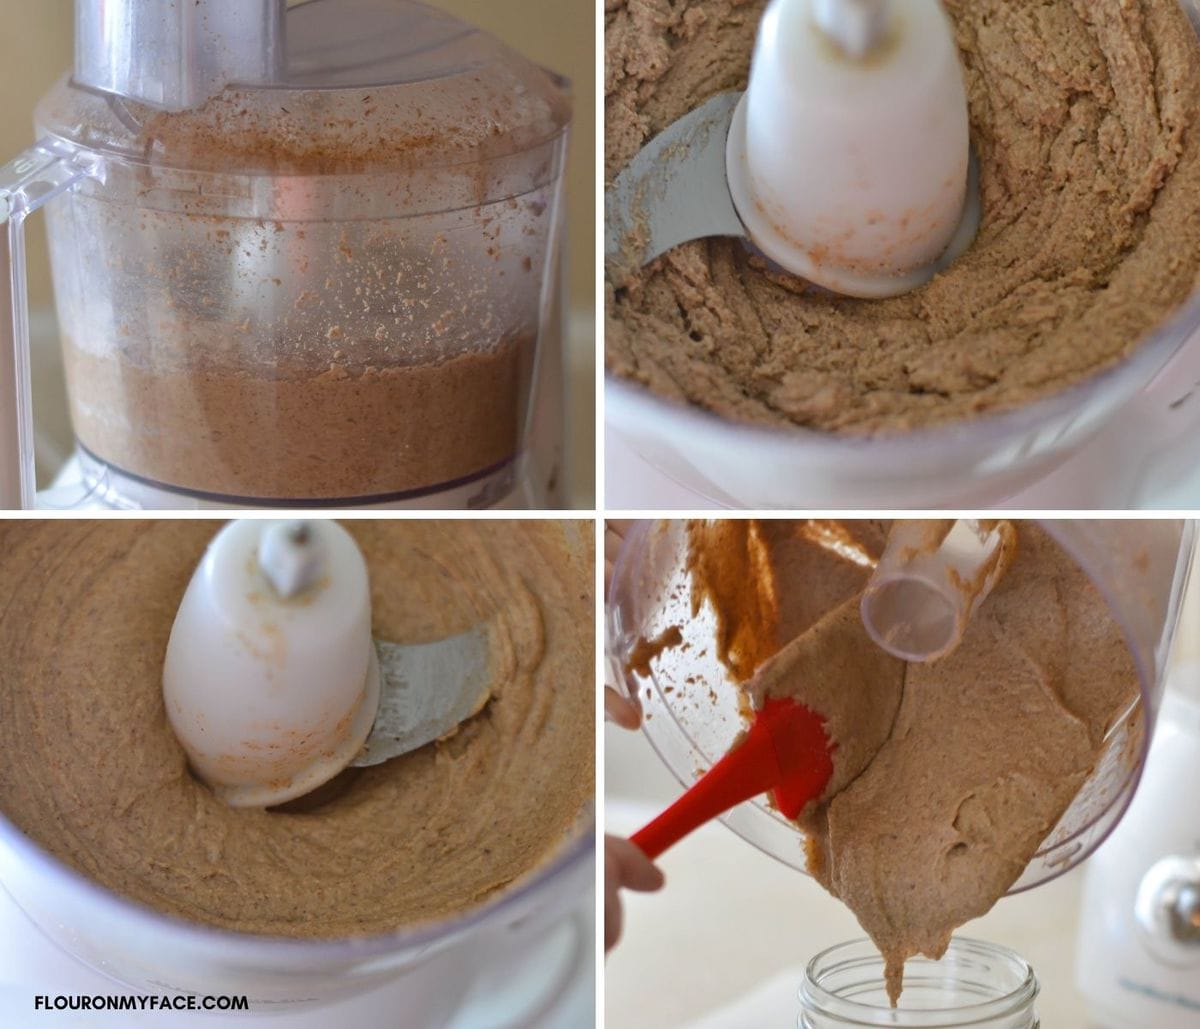 4 phhotos showing the difference constiancy of homemade almond butter.